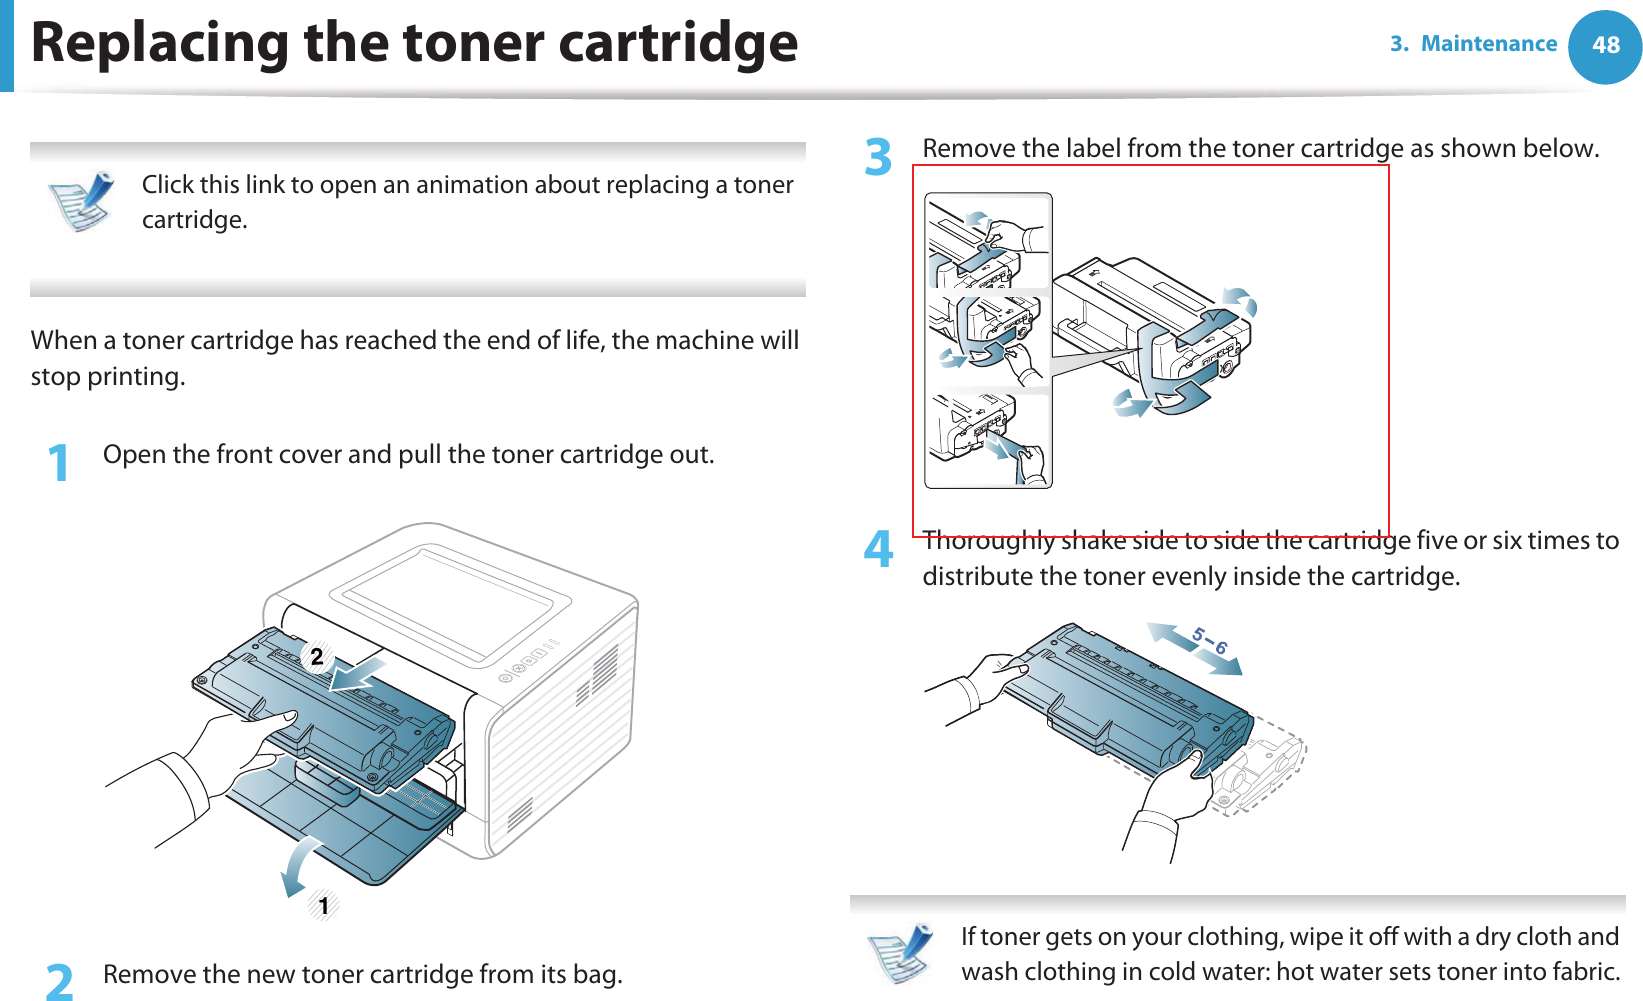 483. MaintenanceReplacing the toner cartridge Click this link to open an animation about replacing a toner cartridge. When a toner cartridge has reached the end of life, the machine will stop printing.1Open the front cover and pull the toner cartridge out.2  Remove the new toner cartridge from its bag. 3  Remove the label from the toner cartridge as shown below.4  Thoroughly shake side to side the cartridge five or six times to distribute the toner evenly inside the cartridge. If toner gets on your clothing, wipe it off with a dry cloth and wash clothing in cold water: hot water sets toner into fabric. 1 2